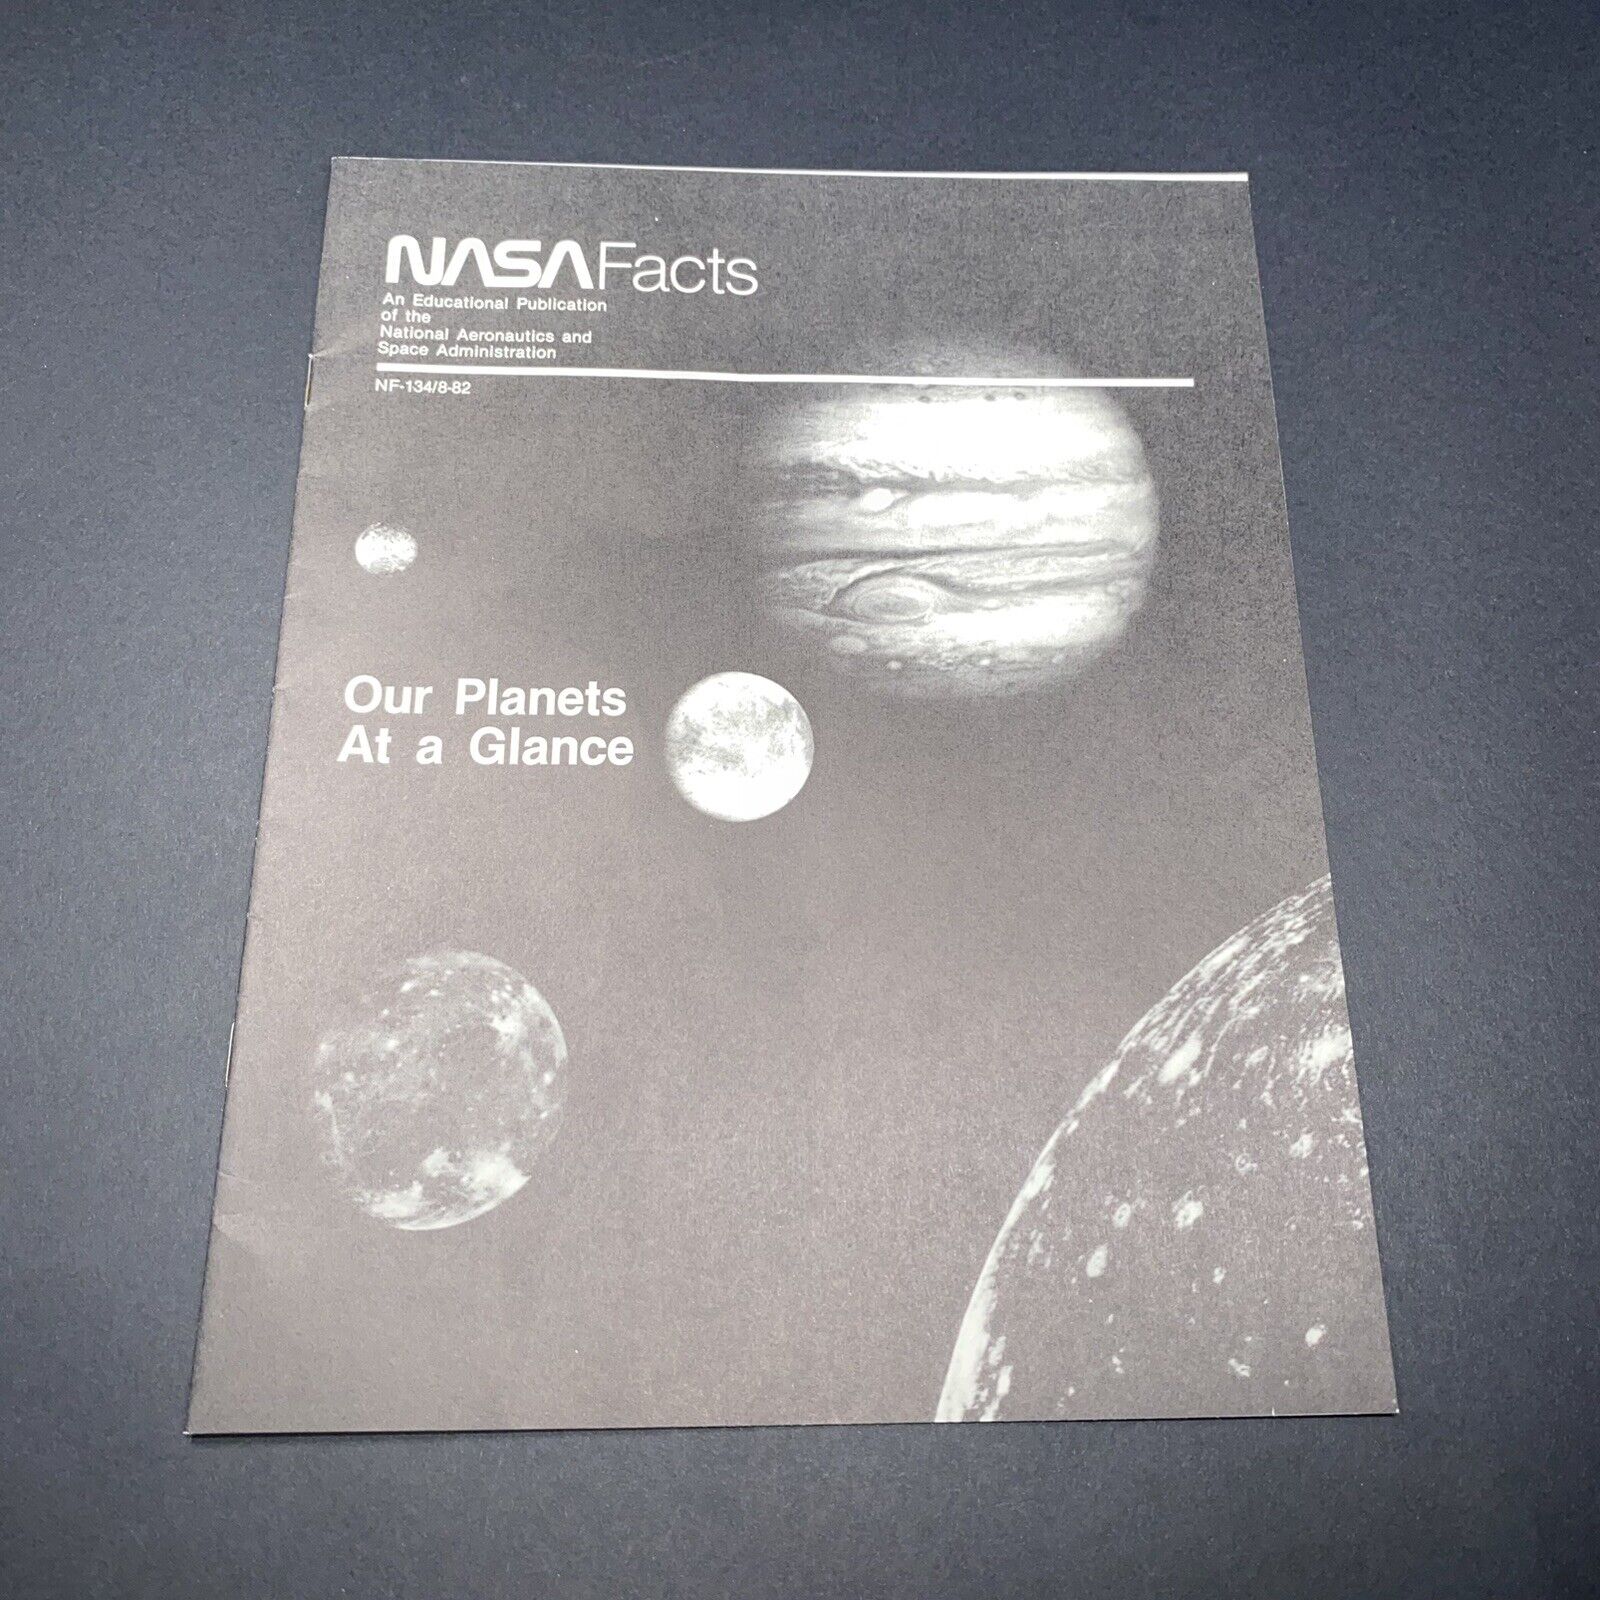 Vintage 1982 NASA Fact Sheet NF-134/8-82 “Our Planets At a Glance” JFK Space